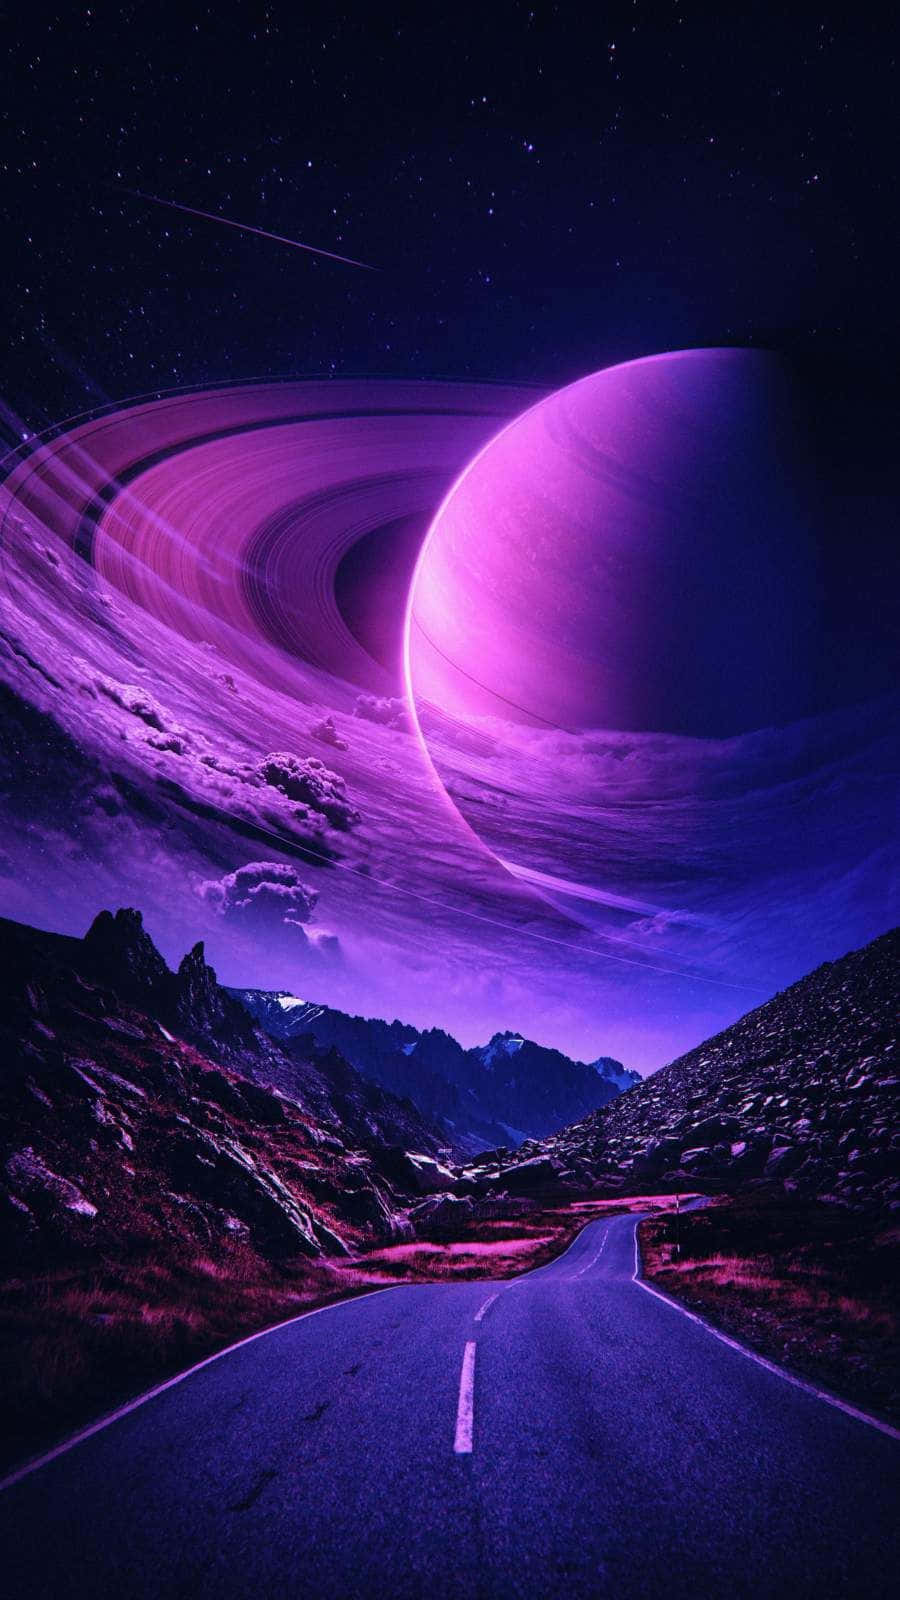 Majestic Saturn in the Cosmos